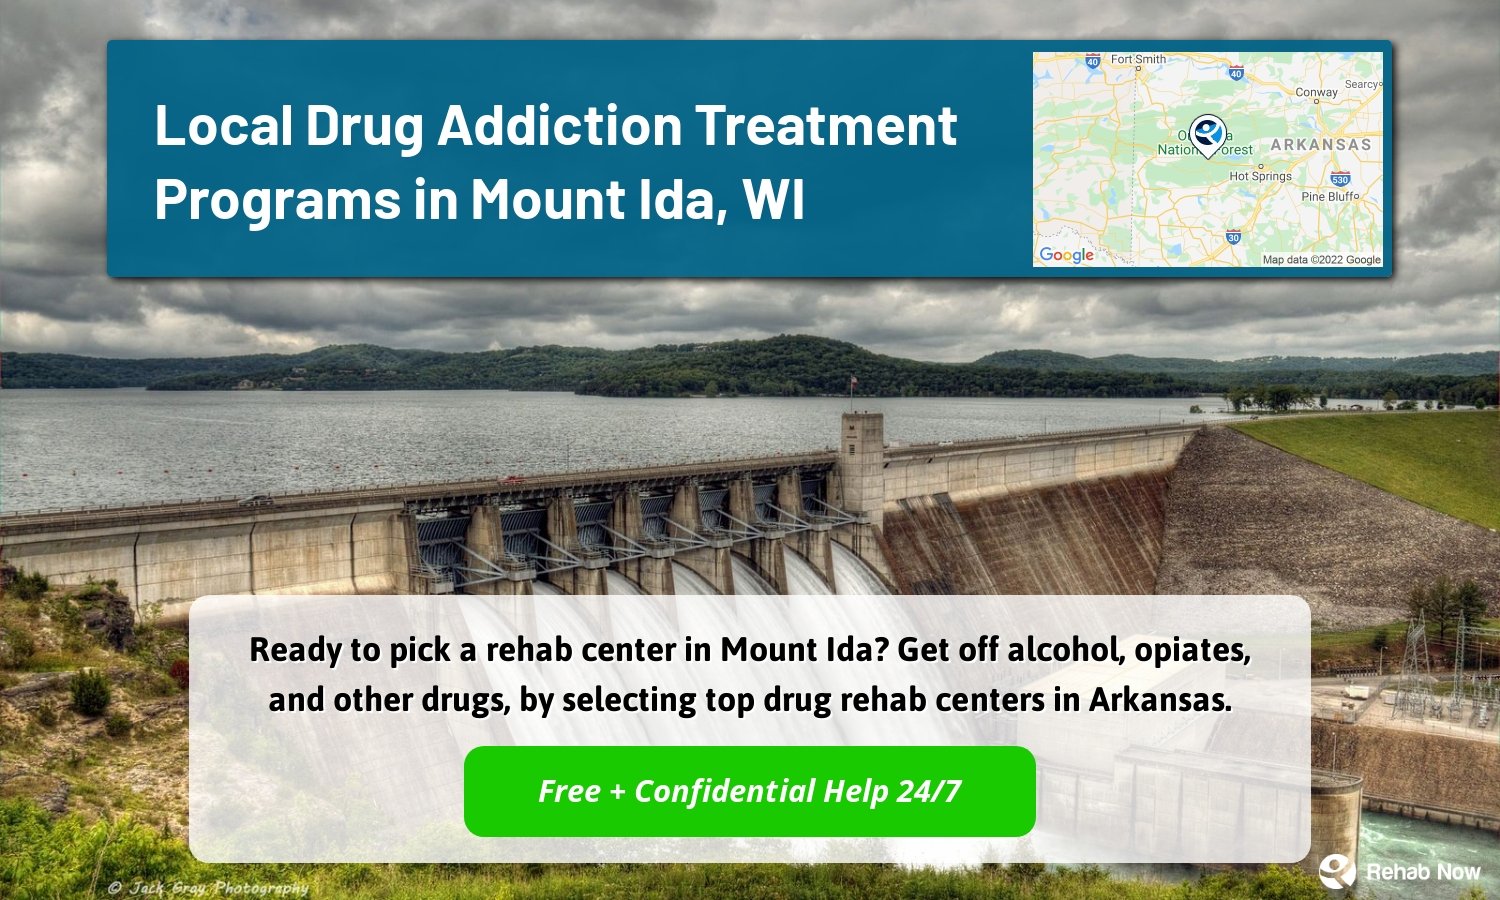 Ready to pick a rehab center in Mount Ida? Get off alcohol, opiates, and other drugs, by selecting top drug rehab centers in Arkansas.